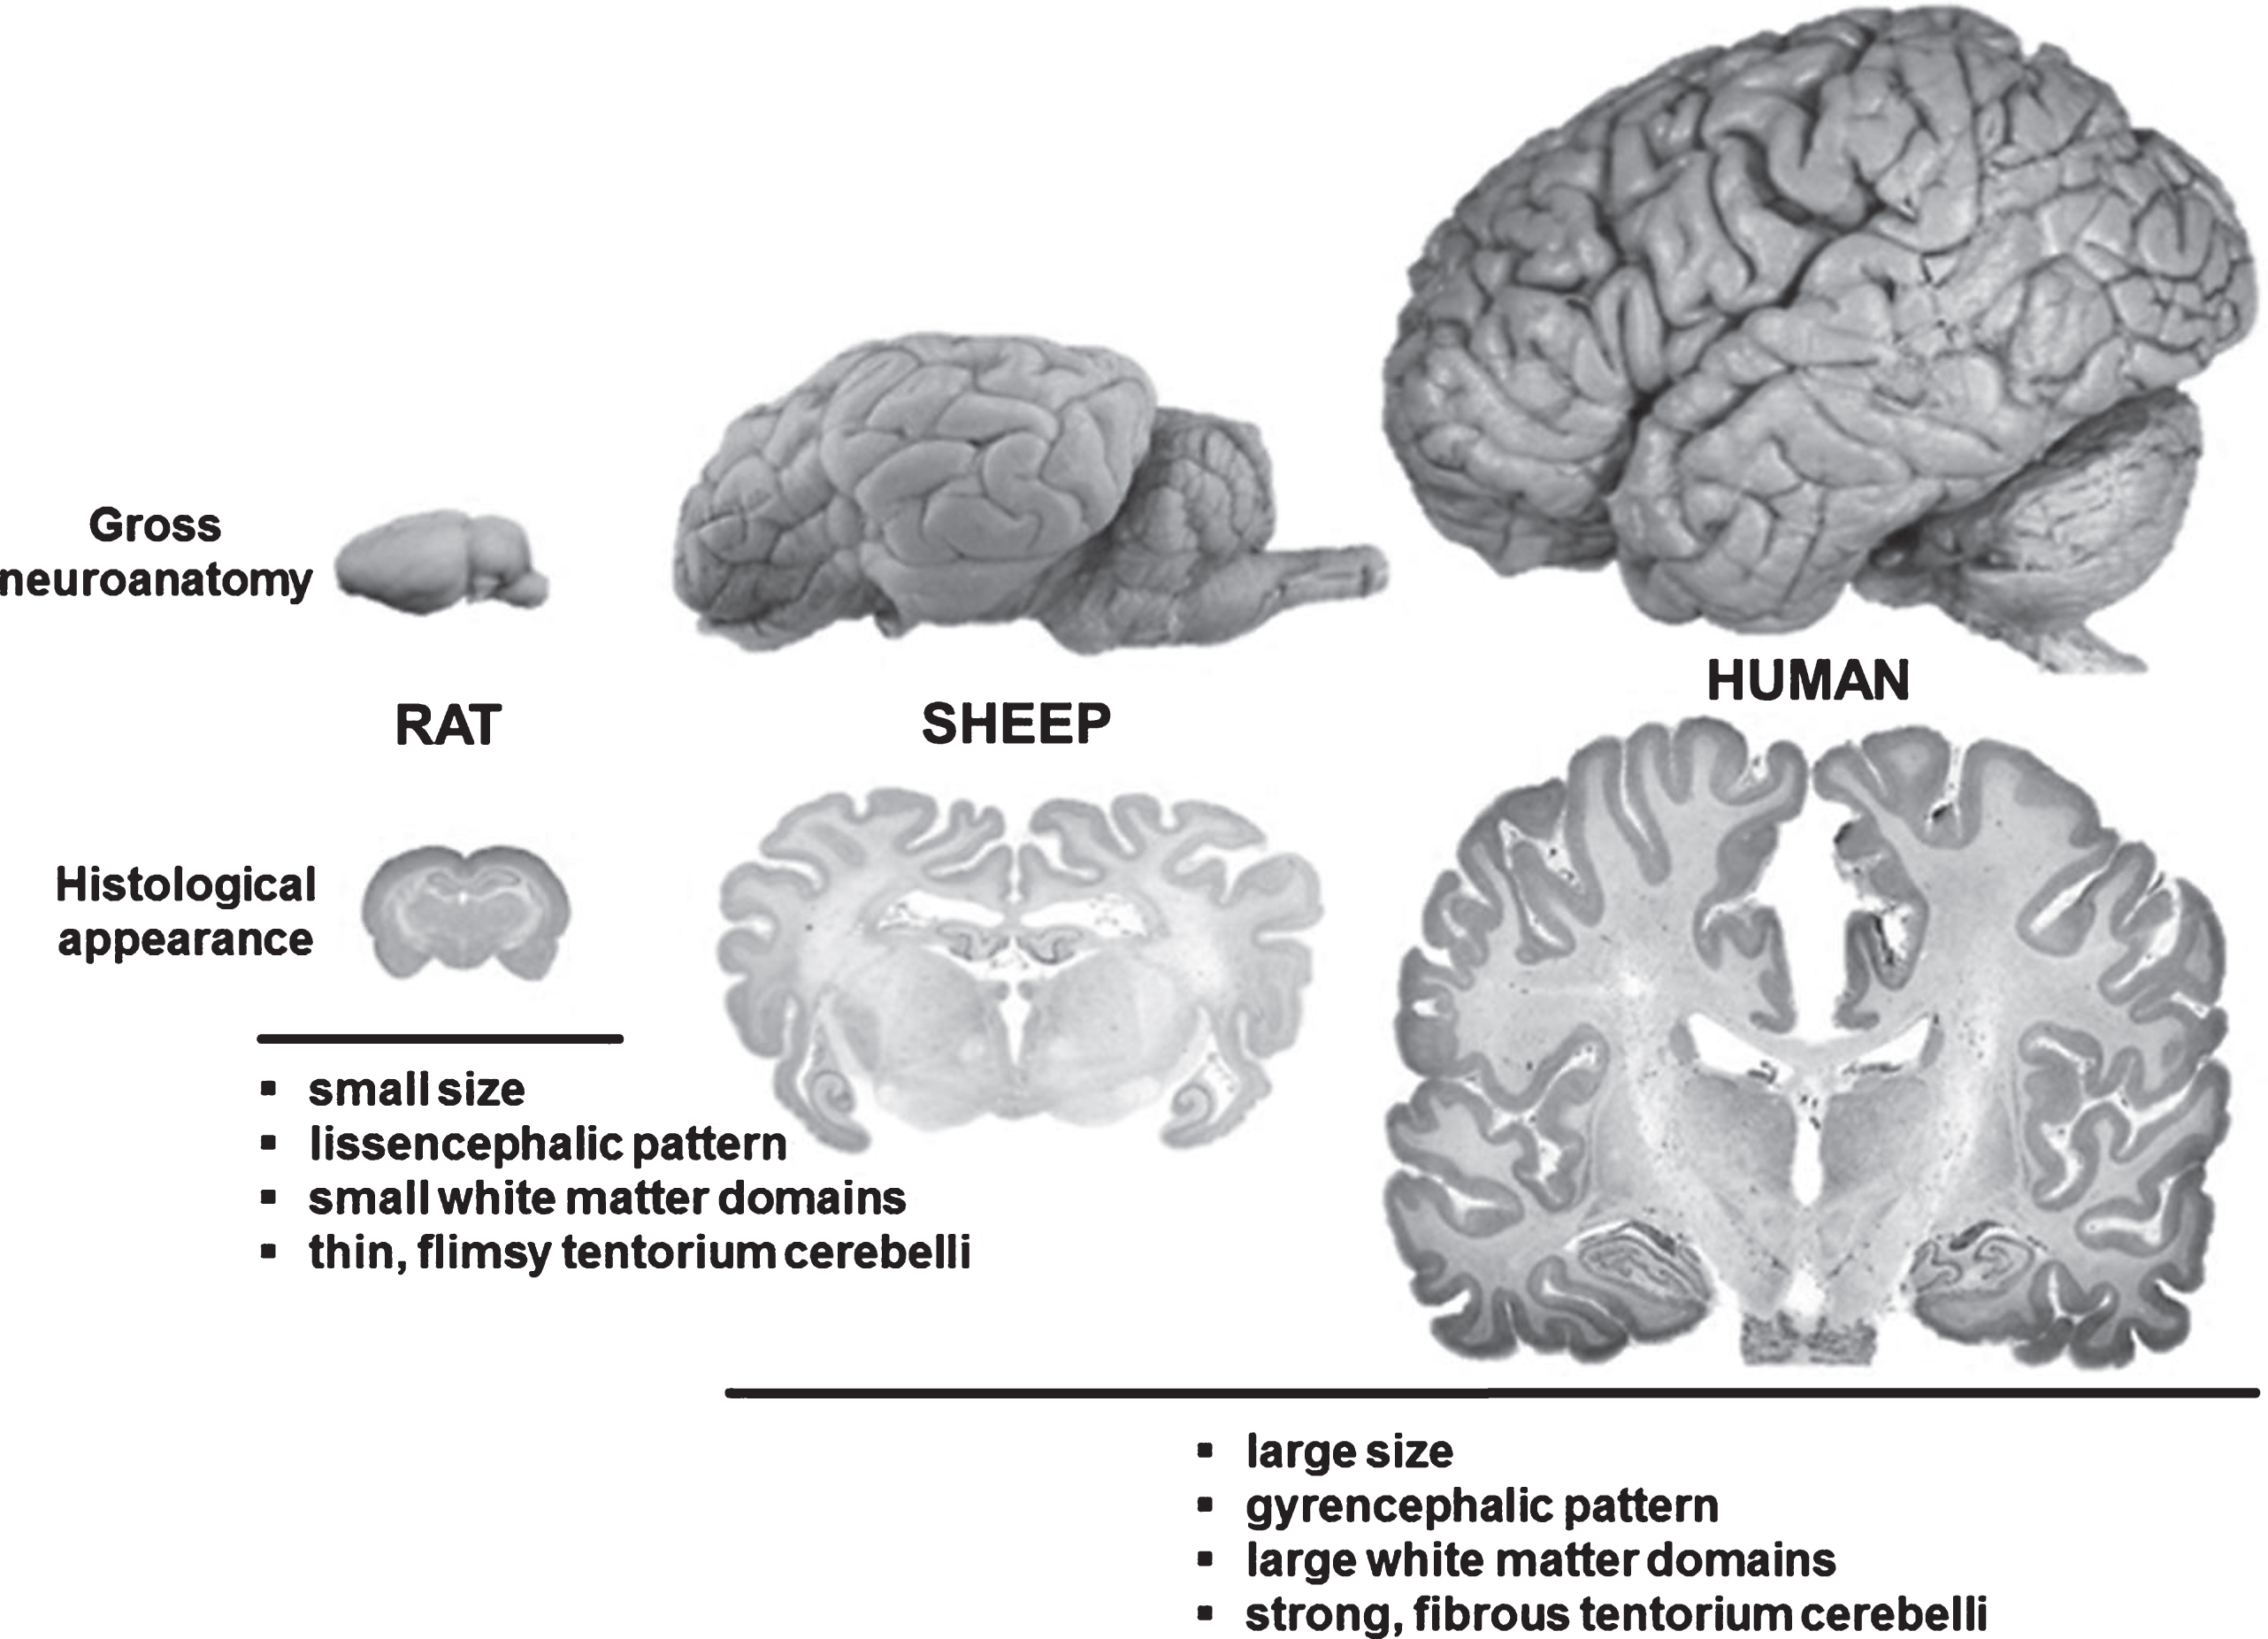 Comparison between rodent, ovine and human brain. Although significantly smaller than the human brain, the ovine brain is also gyrencephalic and exhibits a grey-to-white-matter ration more similar to humans as compared to the rodent brains. Sheep are therefore considered an interesting model species for translational neuroscience.